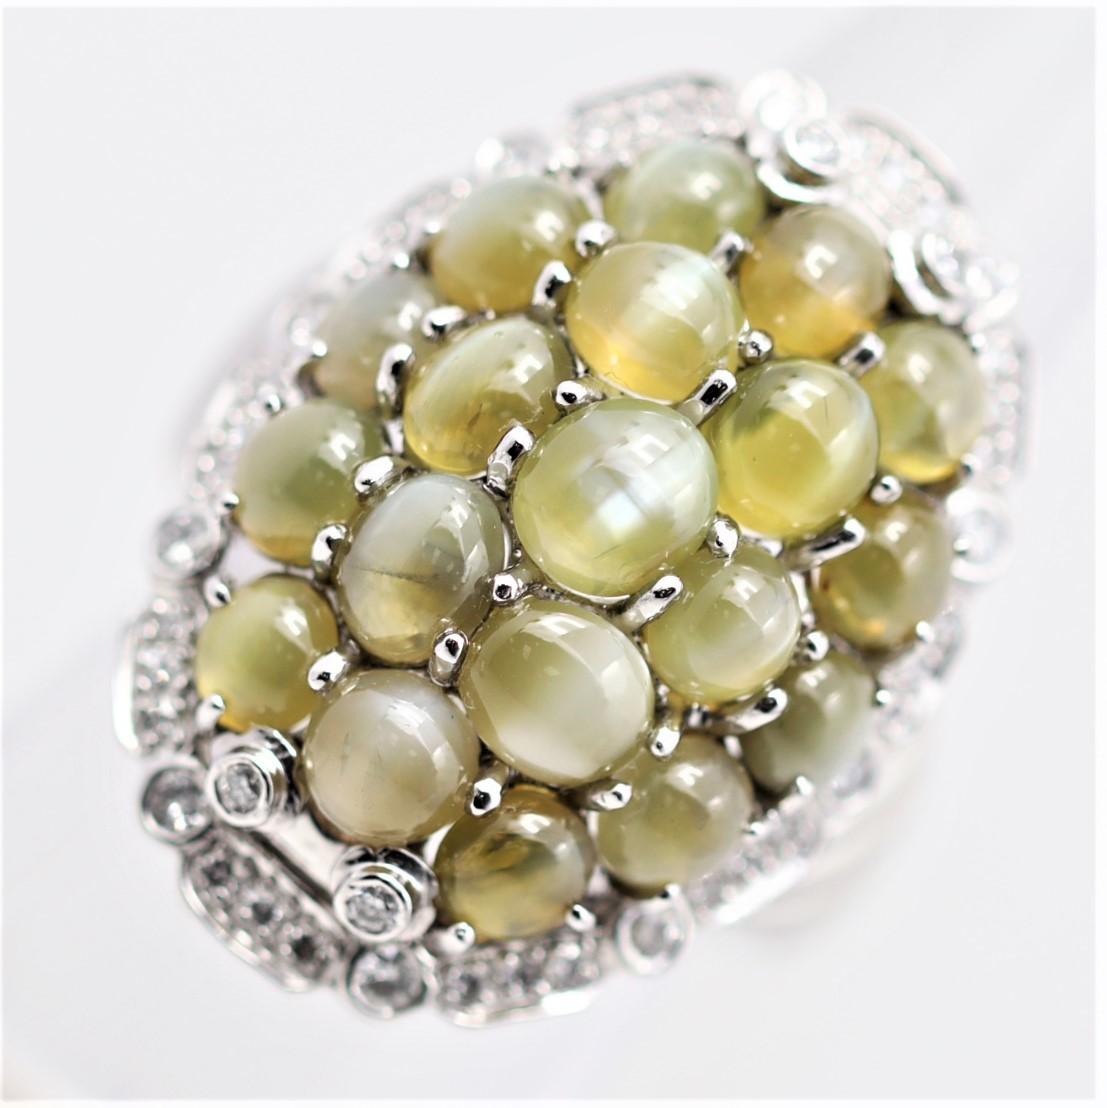 A fun cocktail ring featuring 19 cats eye chrysoberyl cluster set next to each other, which weigh a total of 10.30 carats. It is further accented by 0.51 carats of diamonds which add sparkle and brilliance to the ring. A large ring hand-fabricated